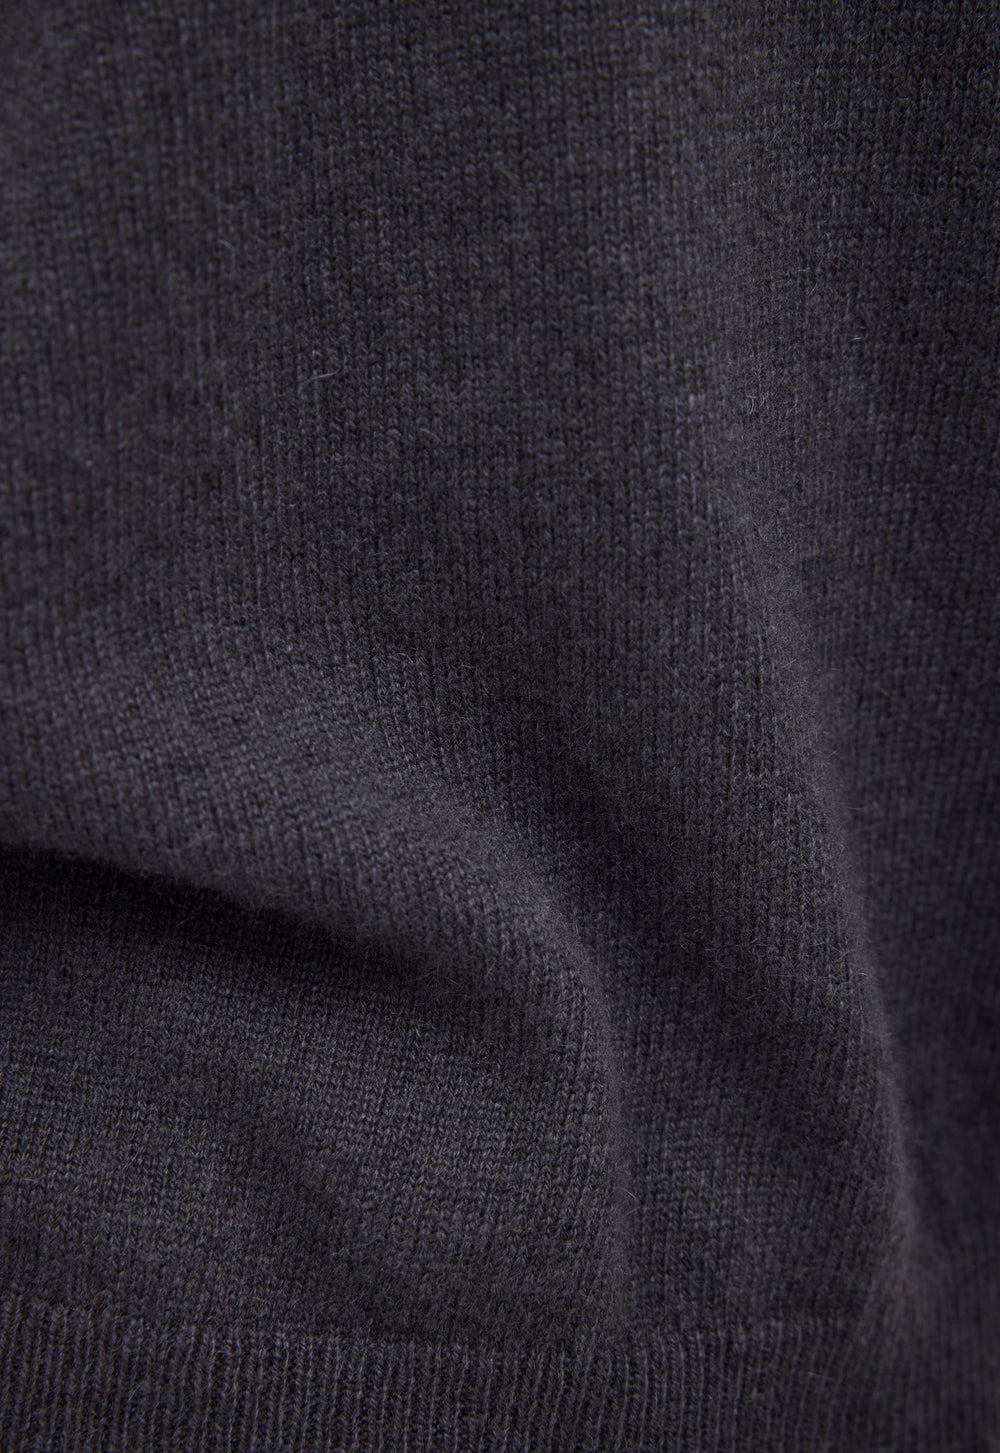 Jac+Jack Peter Cashmere Sweater - Muse Charcoal